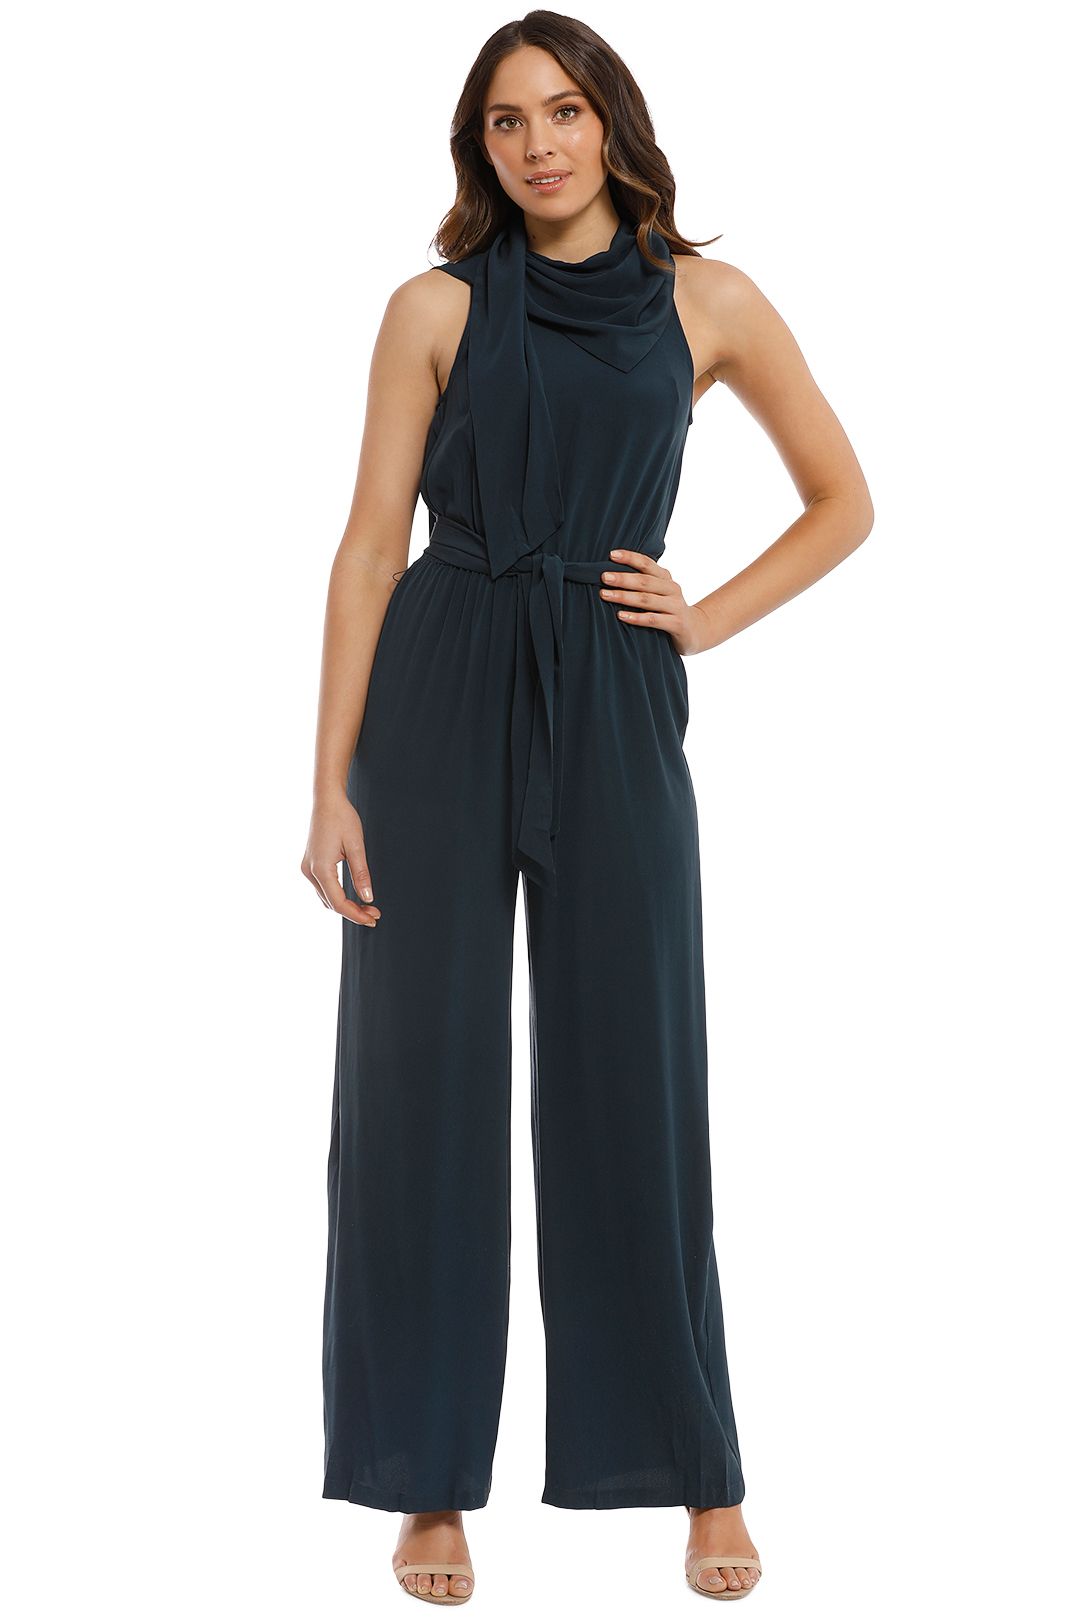 Sass and Bide - The Icon Jumpsuit - Petrol - Front